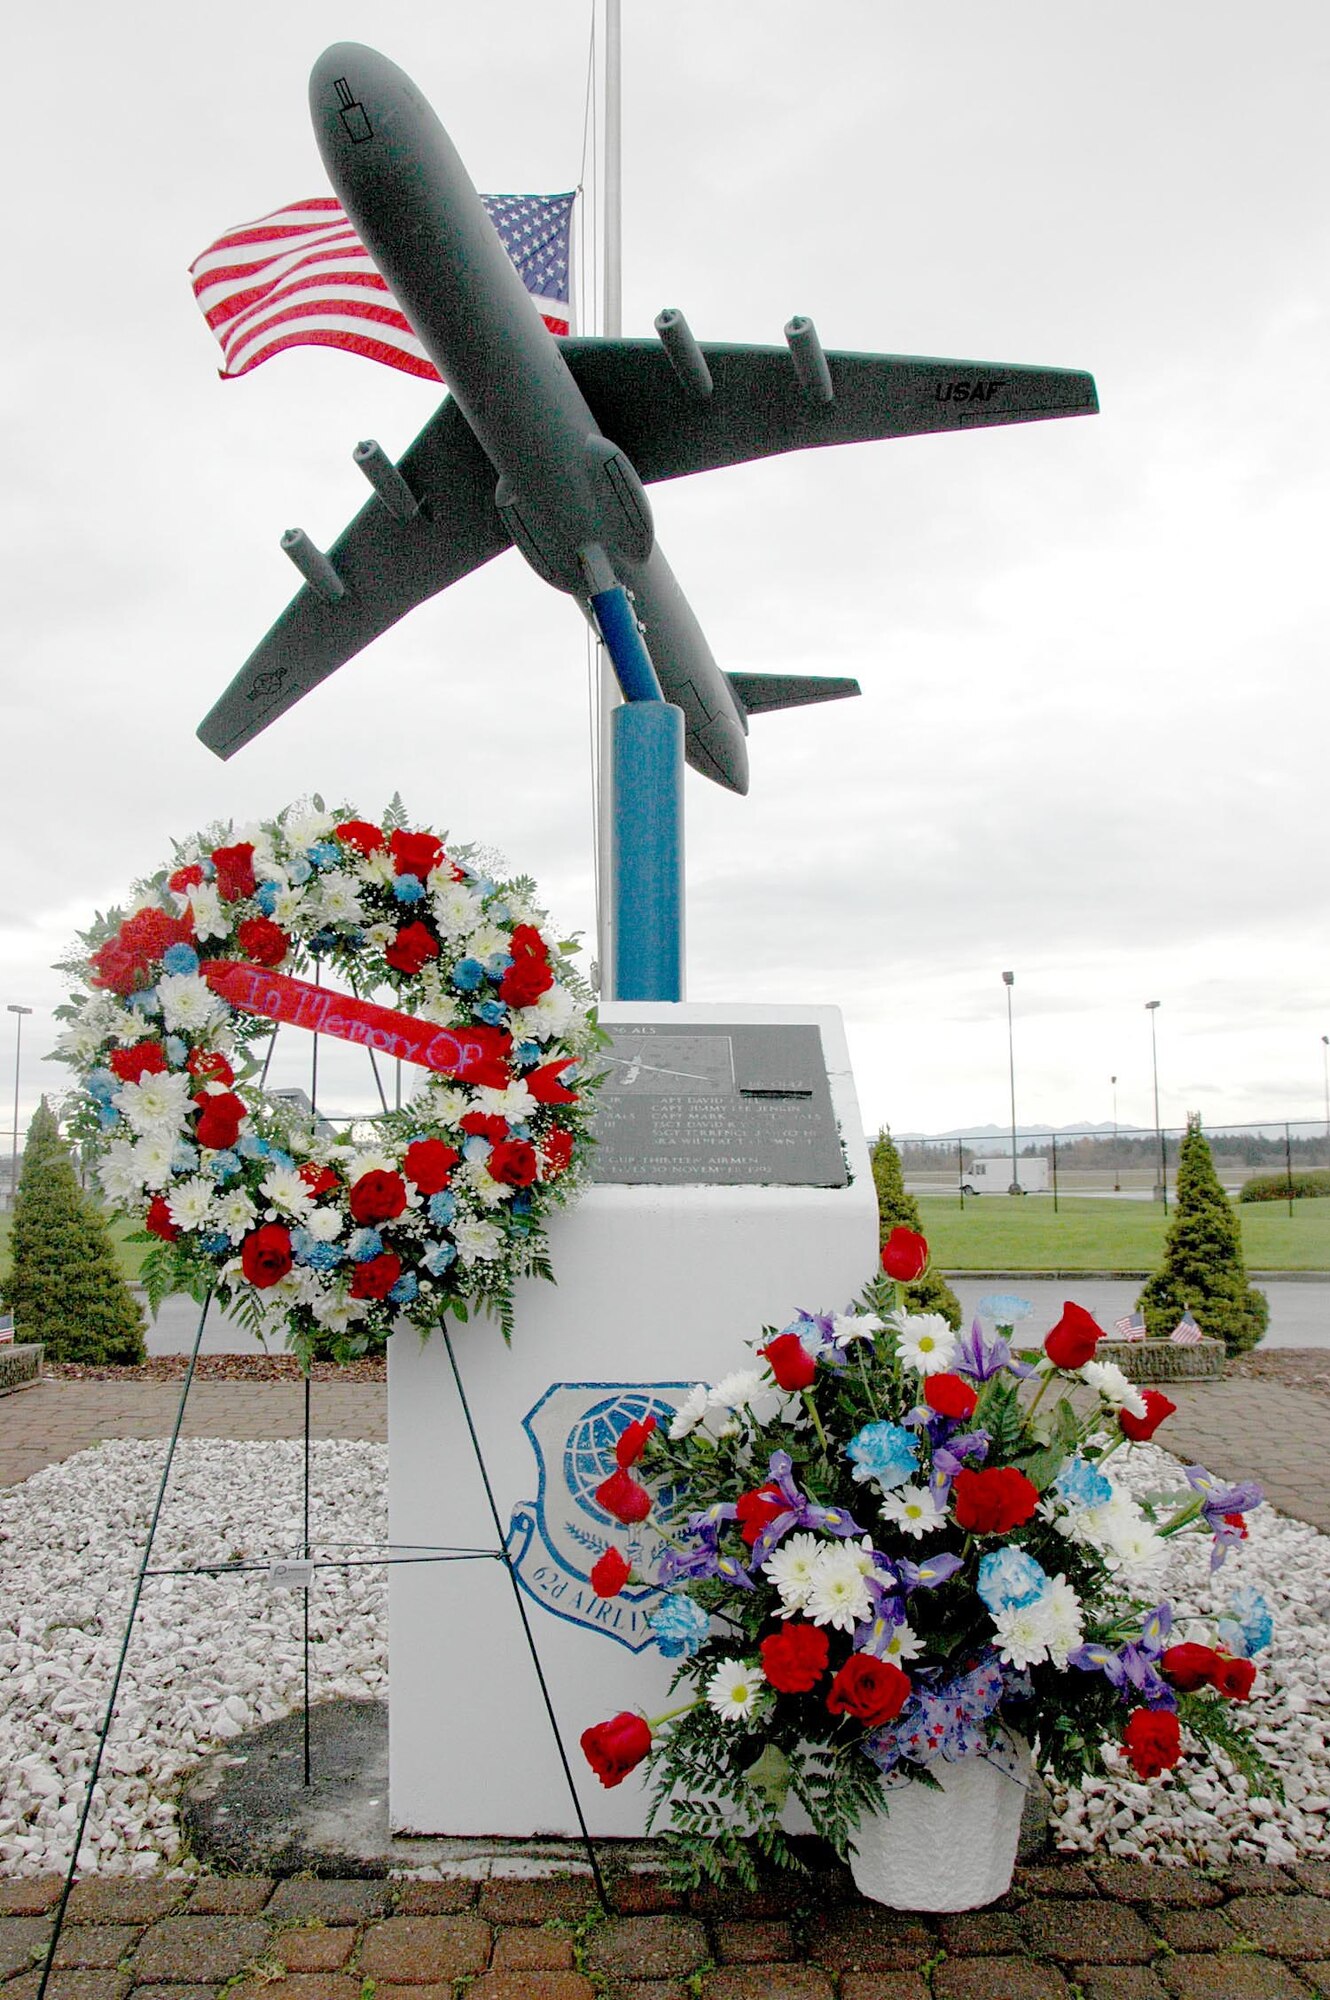 McChord Reserve and active-duty Airmen held a small memorial Nov. 30, in remembrance of 13 aviators who died 20 years ago this day in 1992. The 13 McChord Airmen were killed when two C-141s from McChord Air Force Base, Wash., collided over Montana during an air refueling training mission. (U.S. Air Force photo by Sandra Pishner)